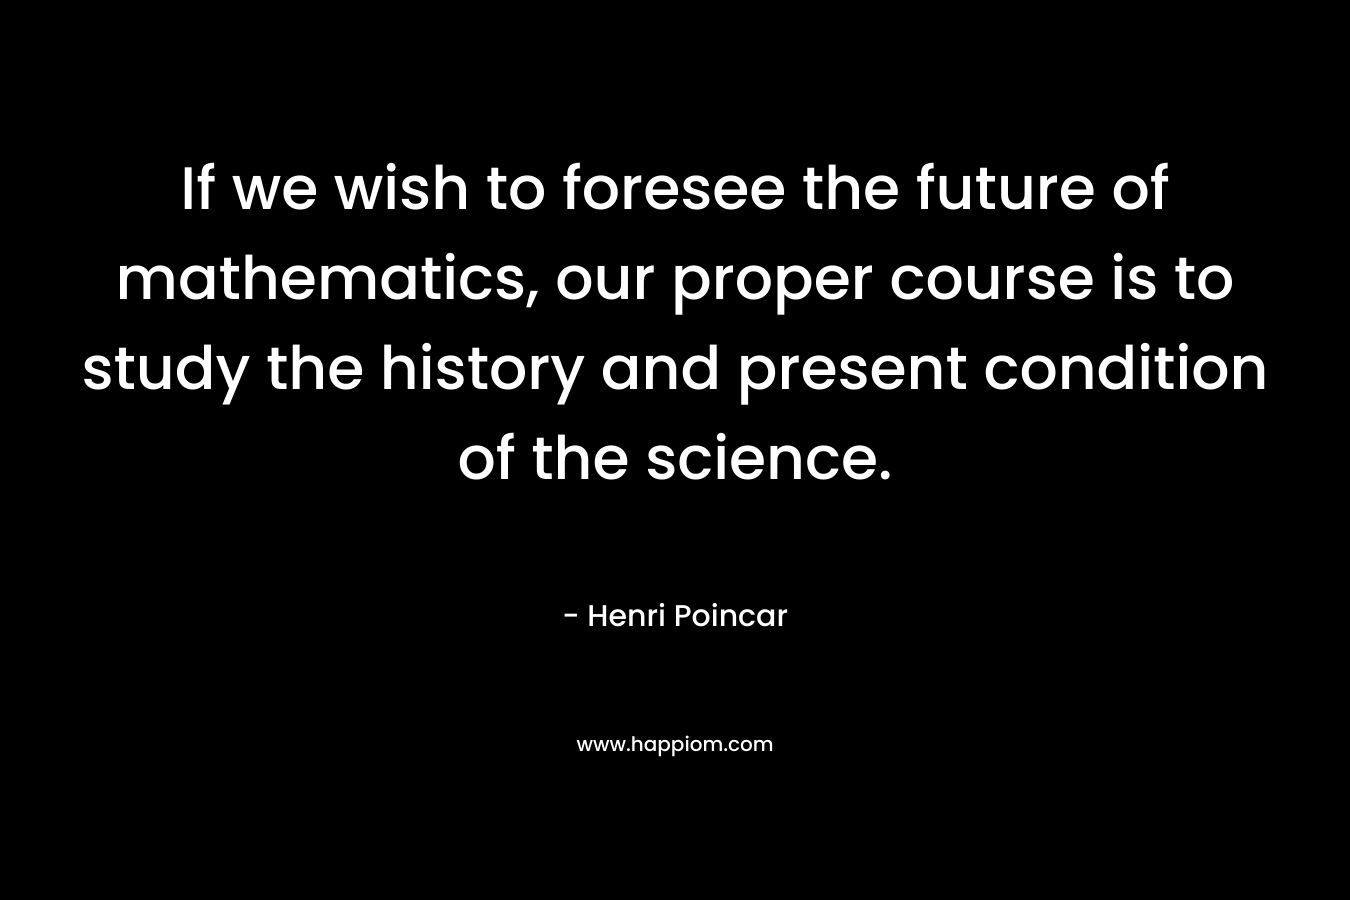 If we wish to foresee the future of mathematics, our proper course is to study the history and present condition of the science. – Henri Poincar